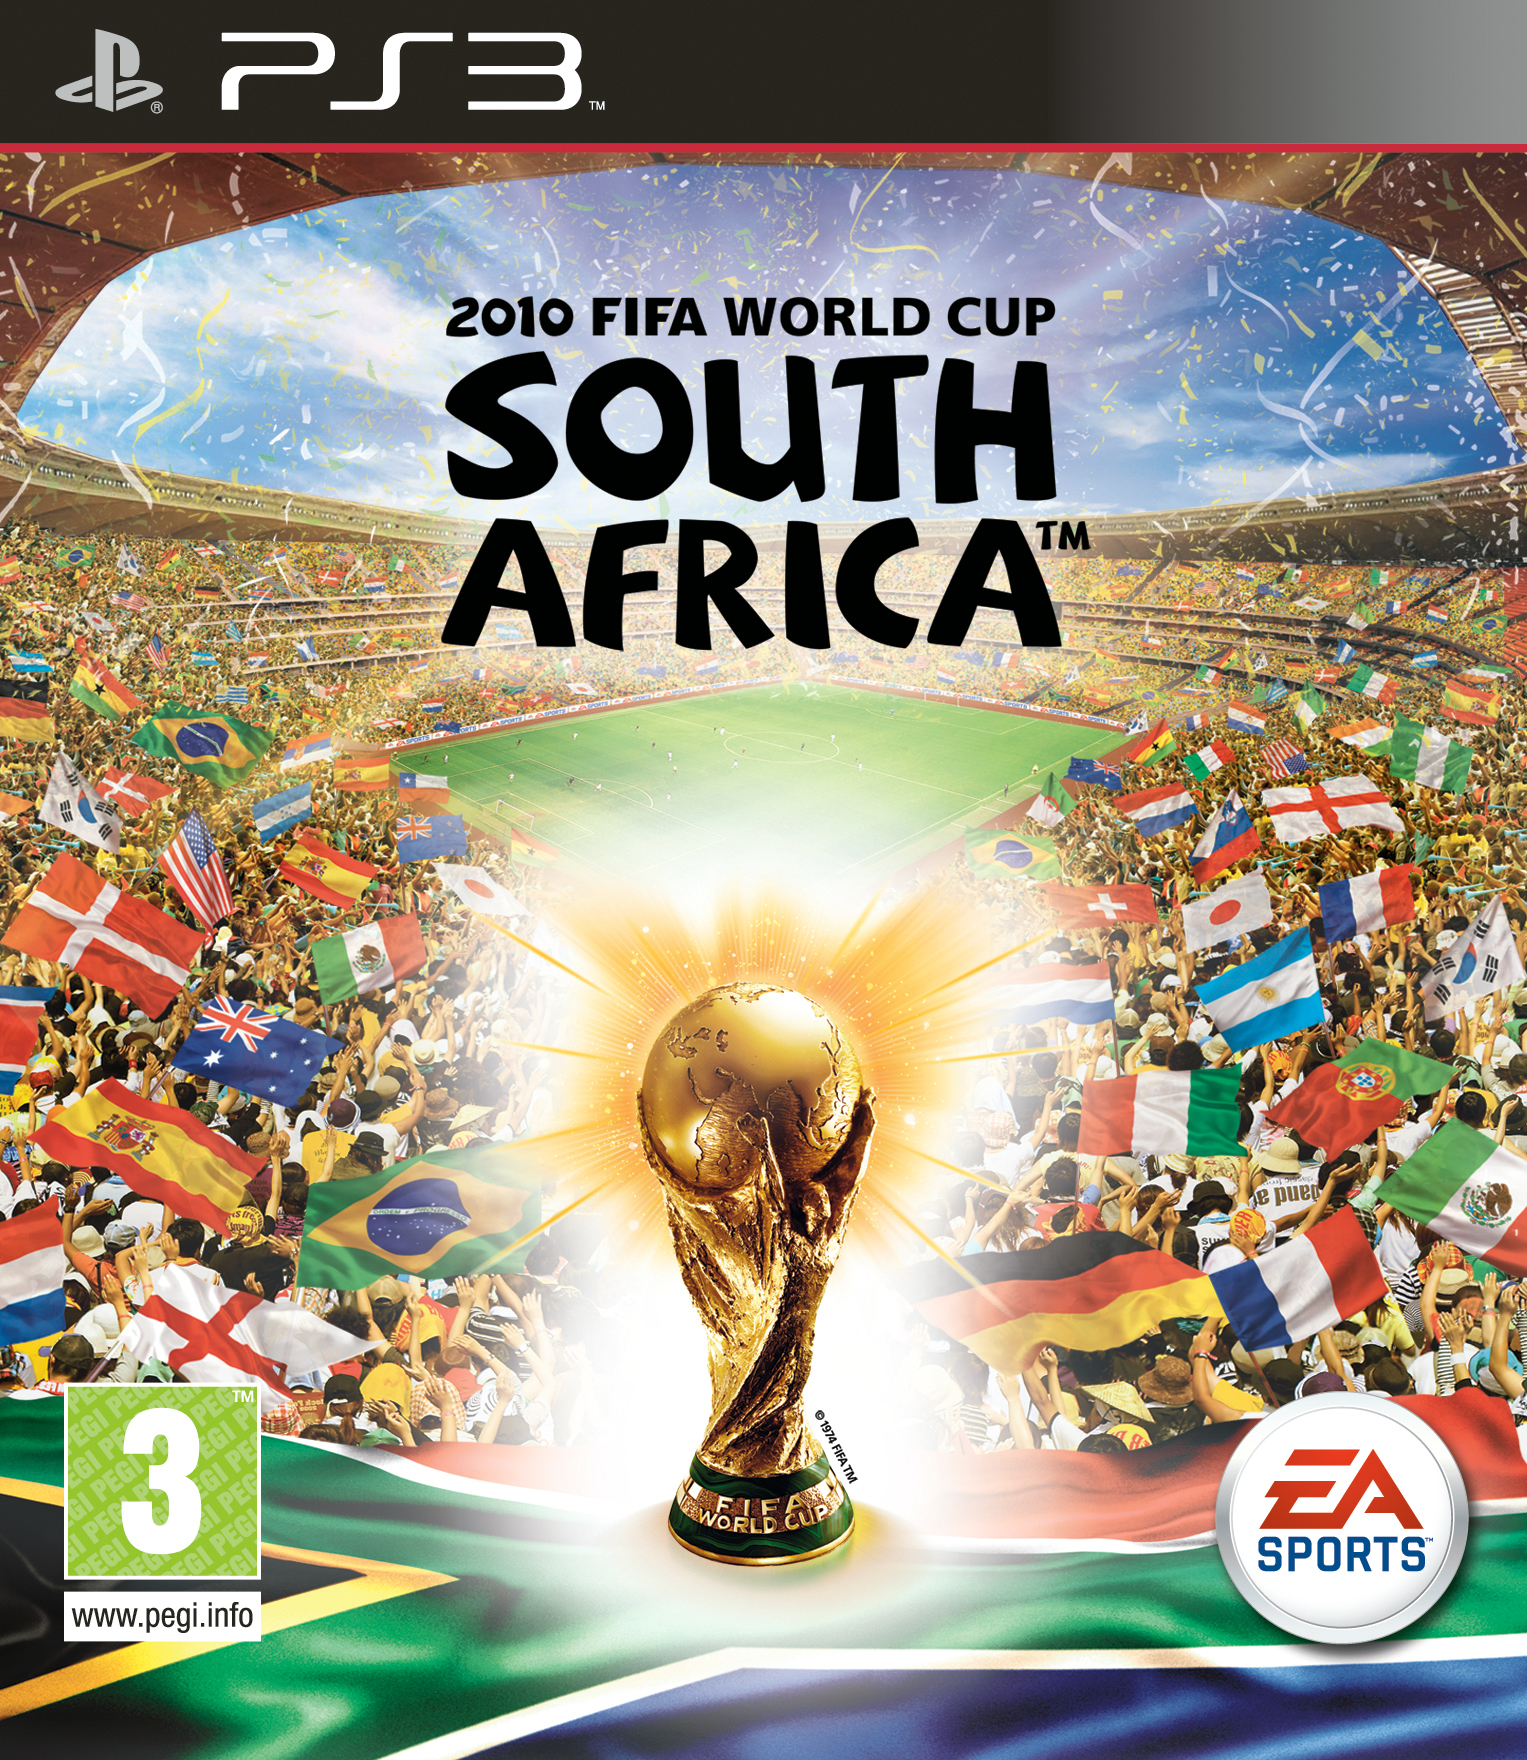 2010 FIFA World Cup South Africa til PlayStation 3